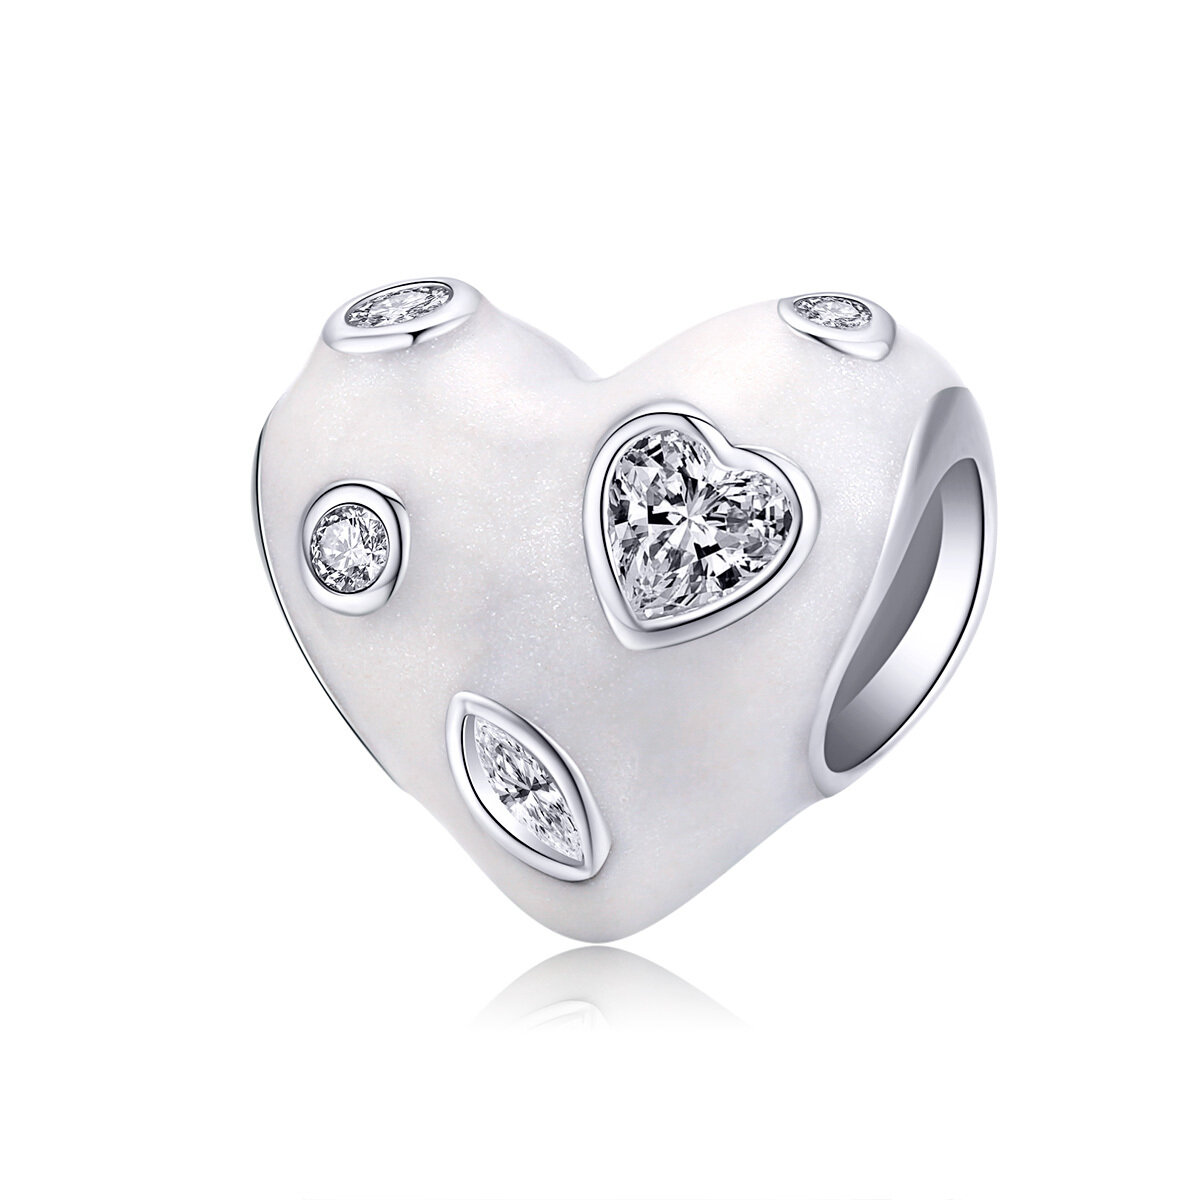 GemKing BSC179 Pure love S925 Sterling Silver Charm